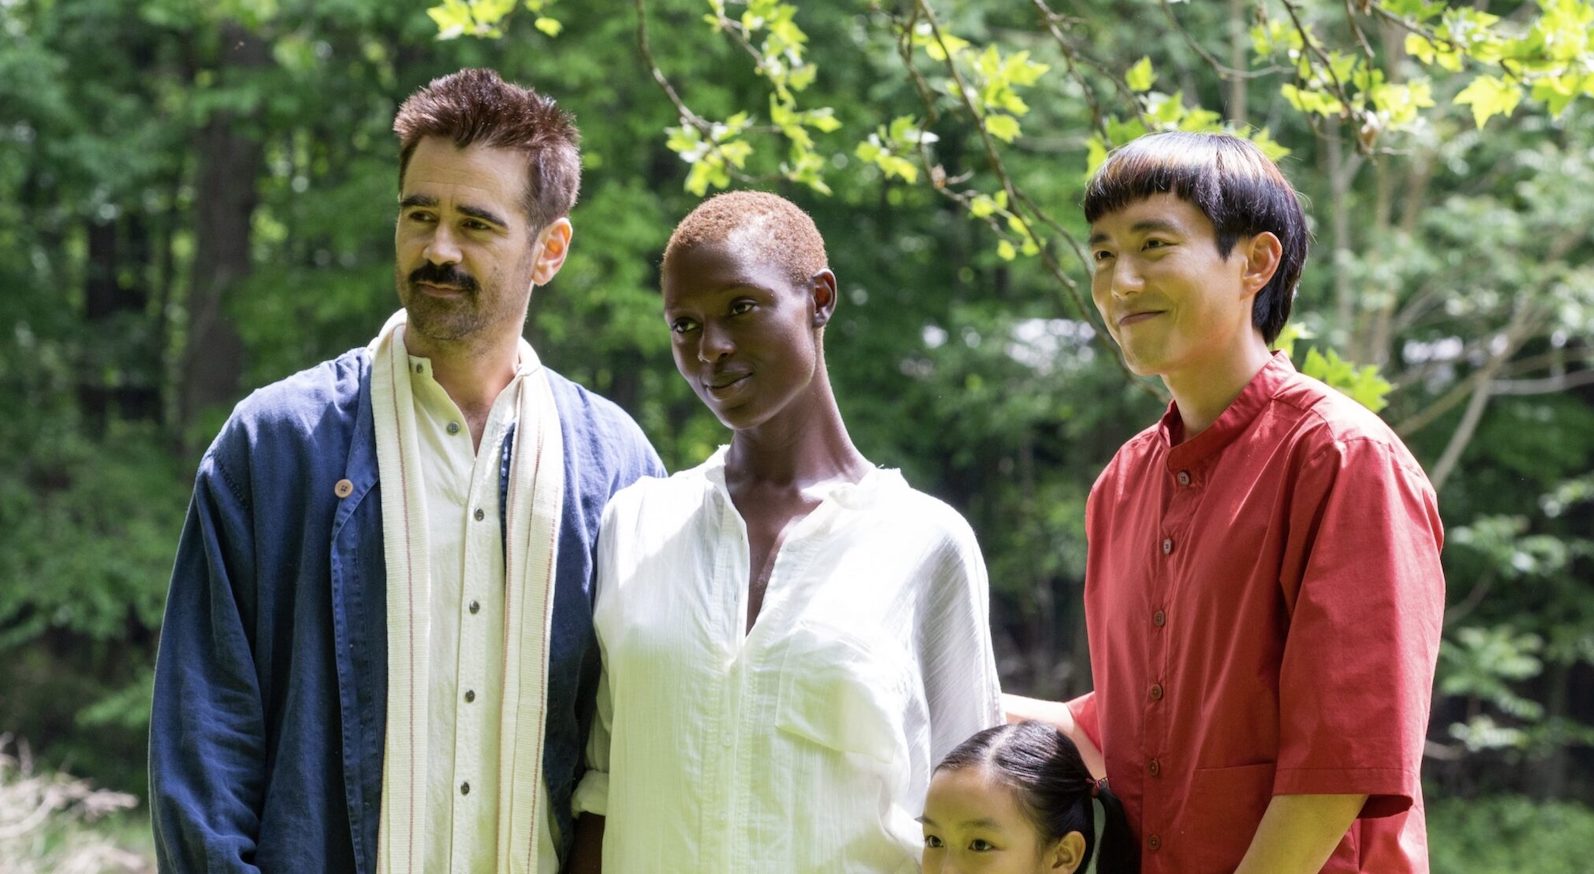 A family of four, including a man playing an android, dressed in a red shirt, stands in a backyard garden and smiles